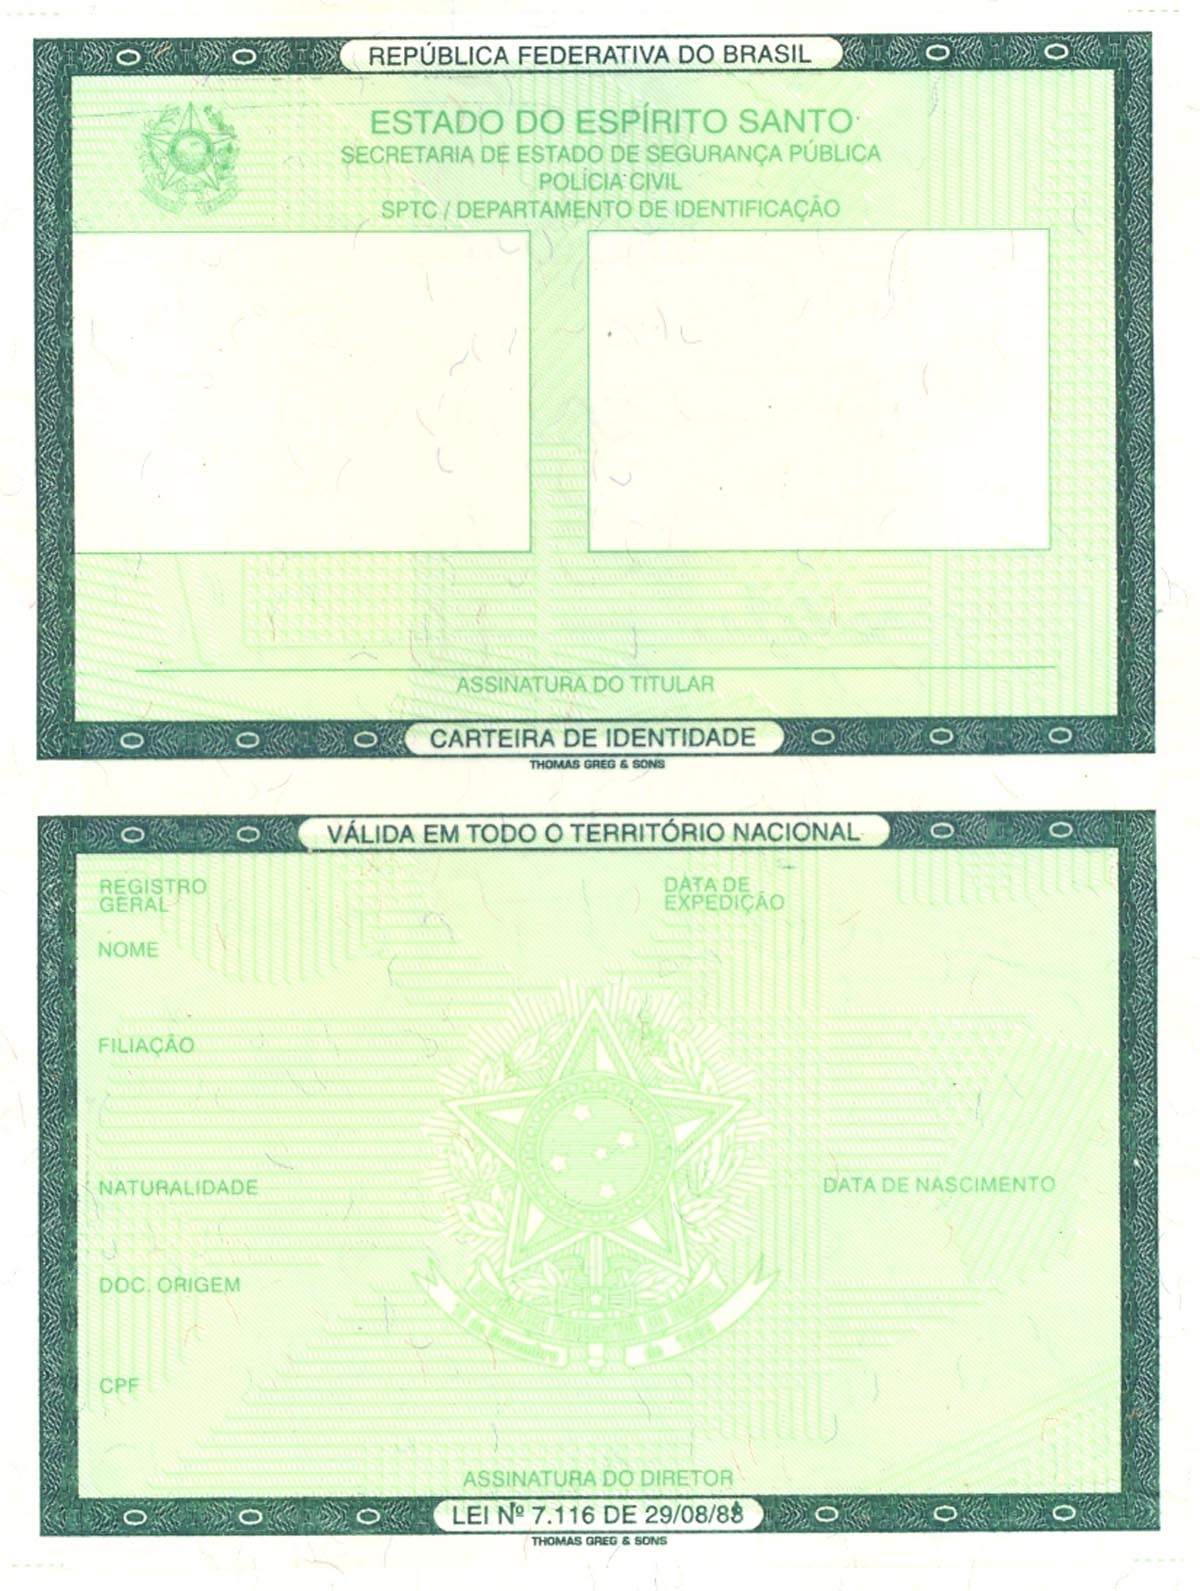 birth certificate national id document